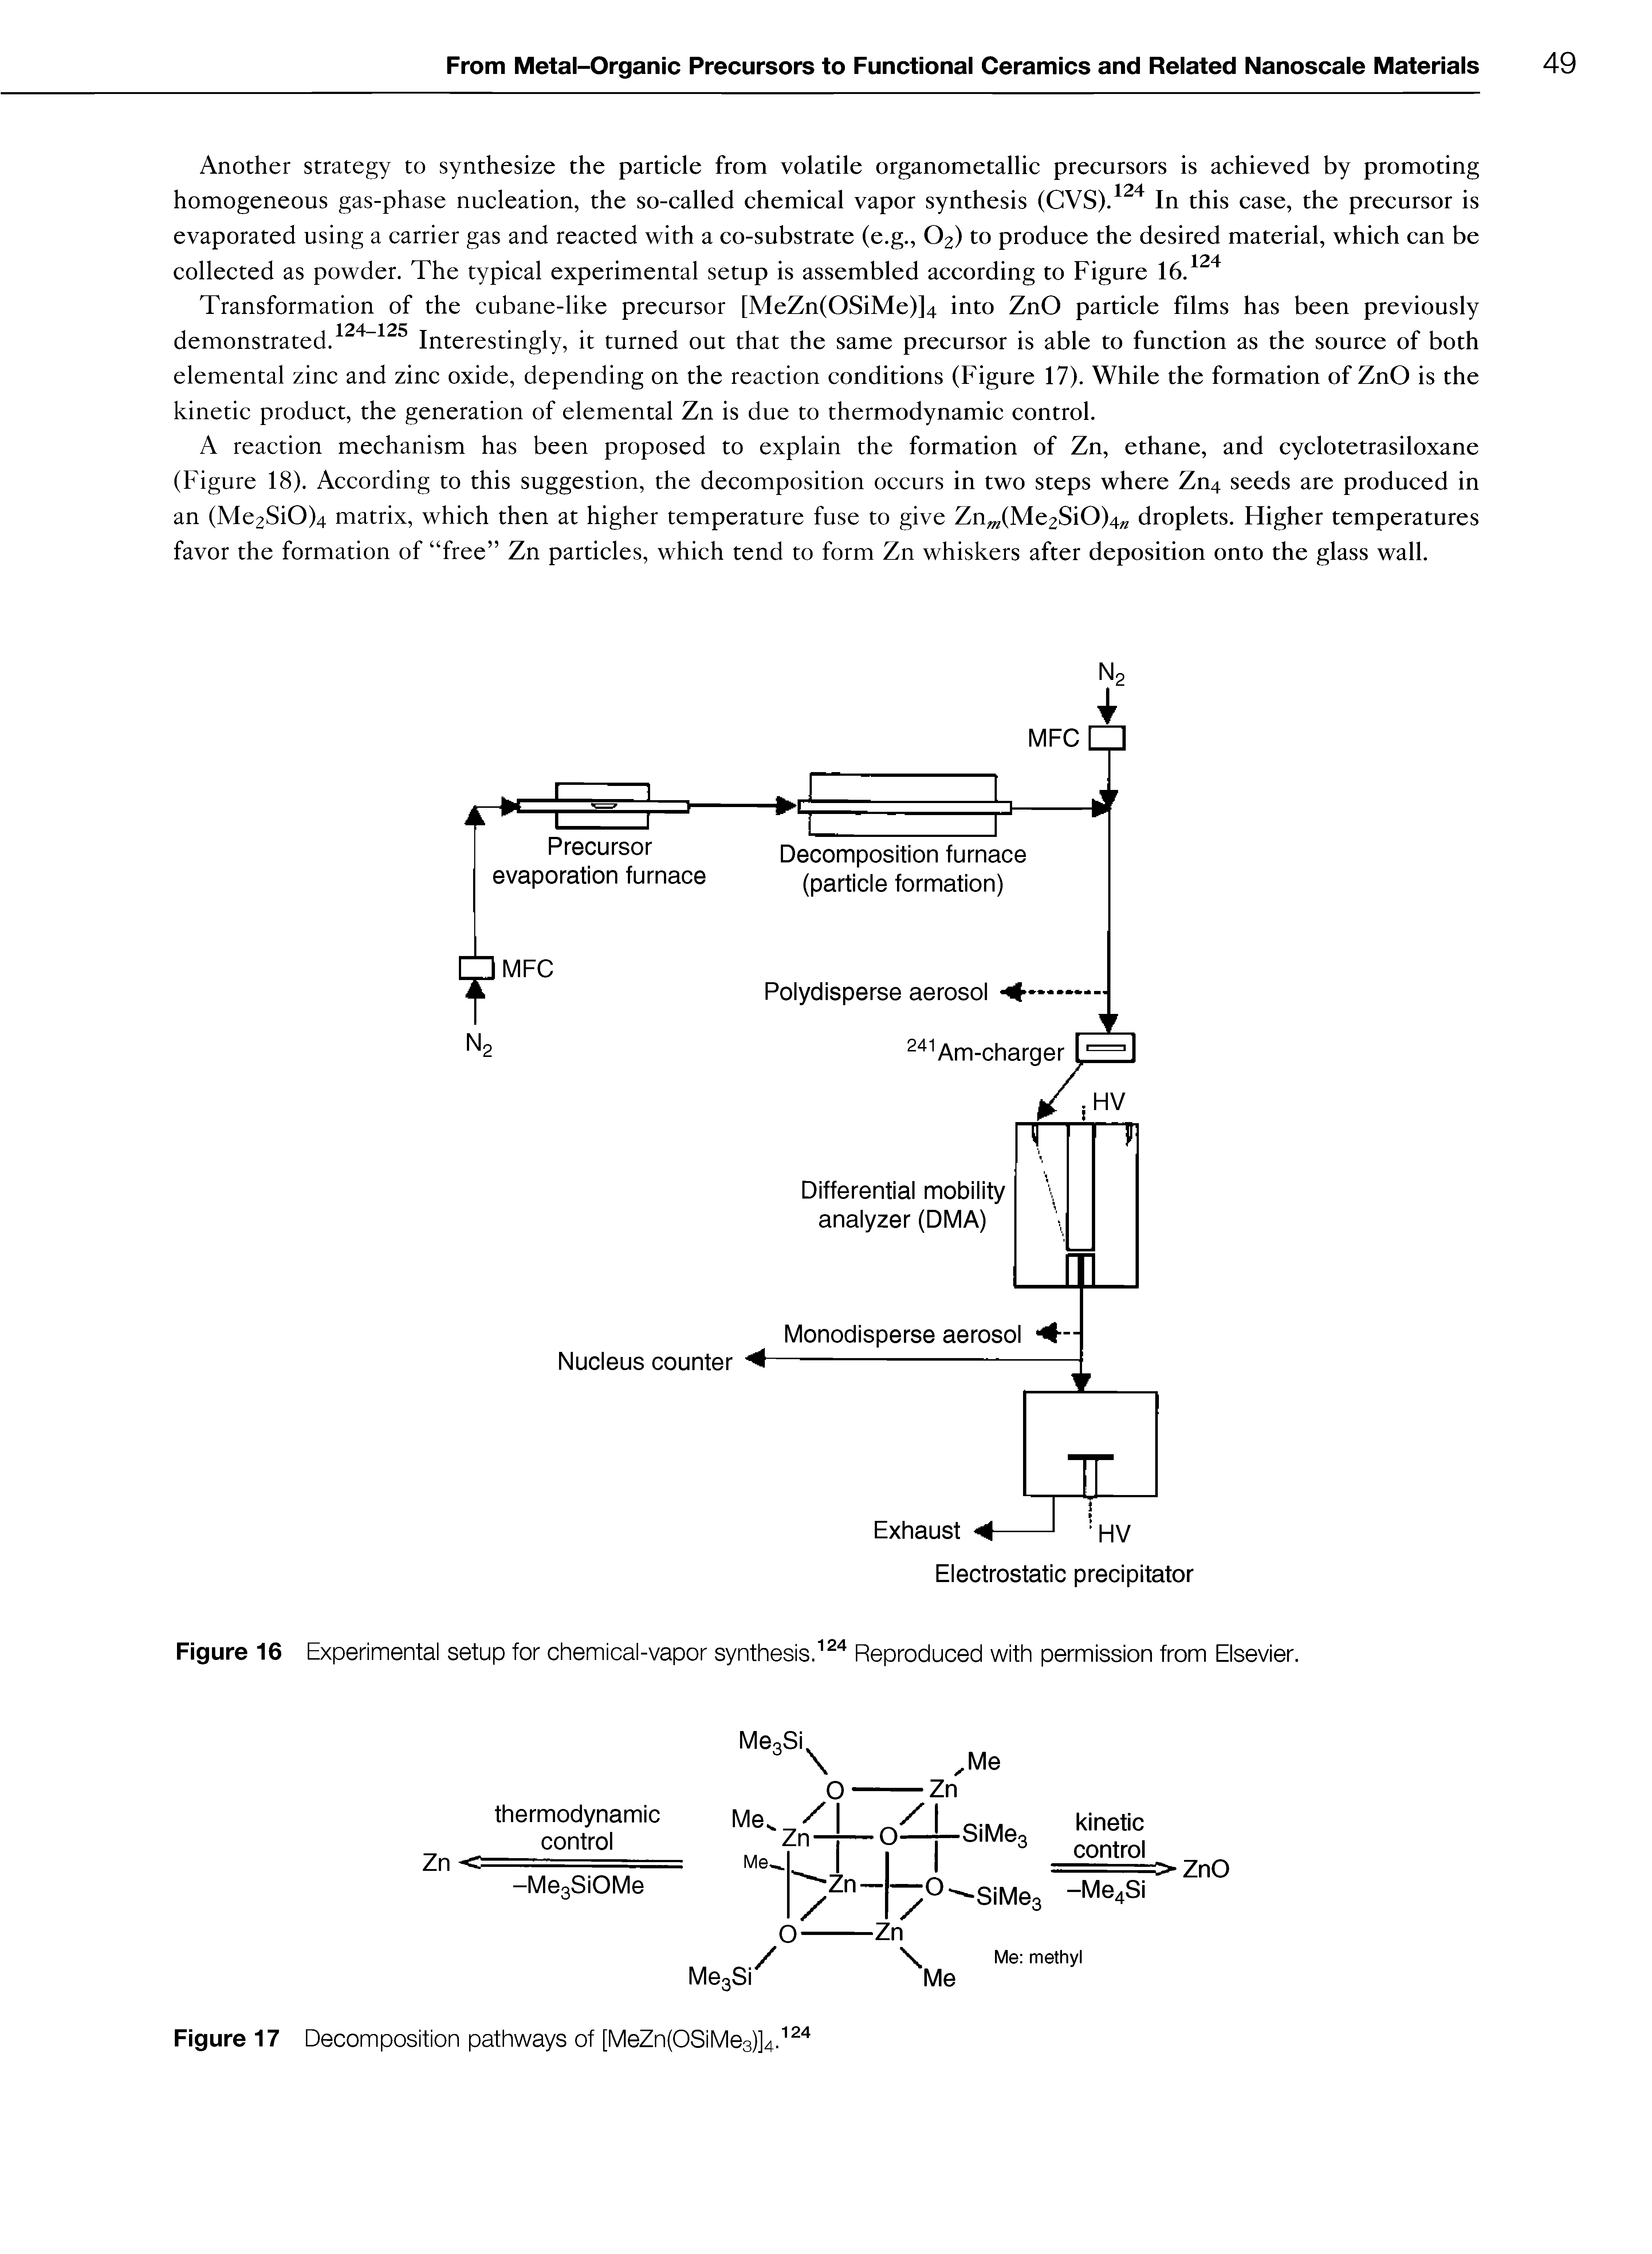 Figure 16 Experimental setup for chemical-vapor synthesis.Reproduced with permission from Elsevier.